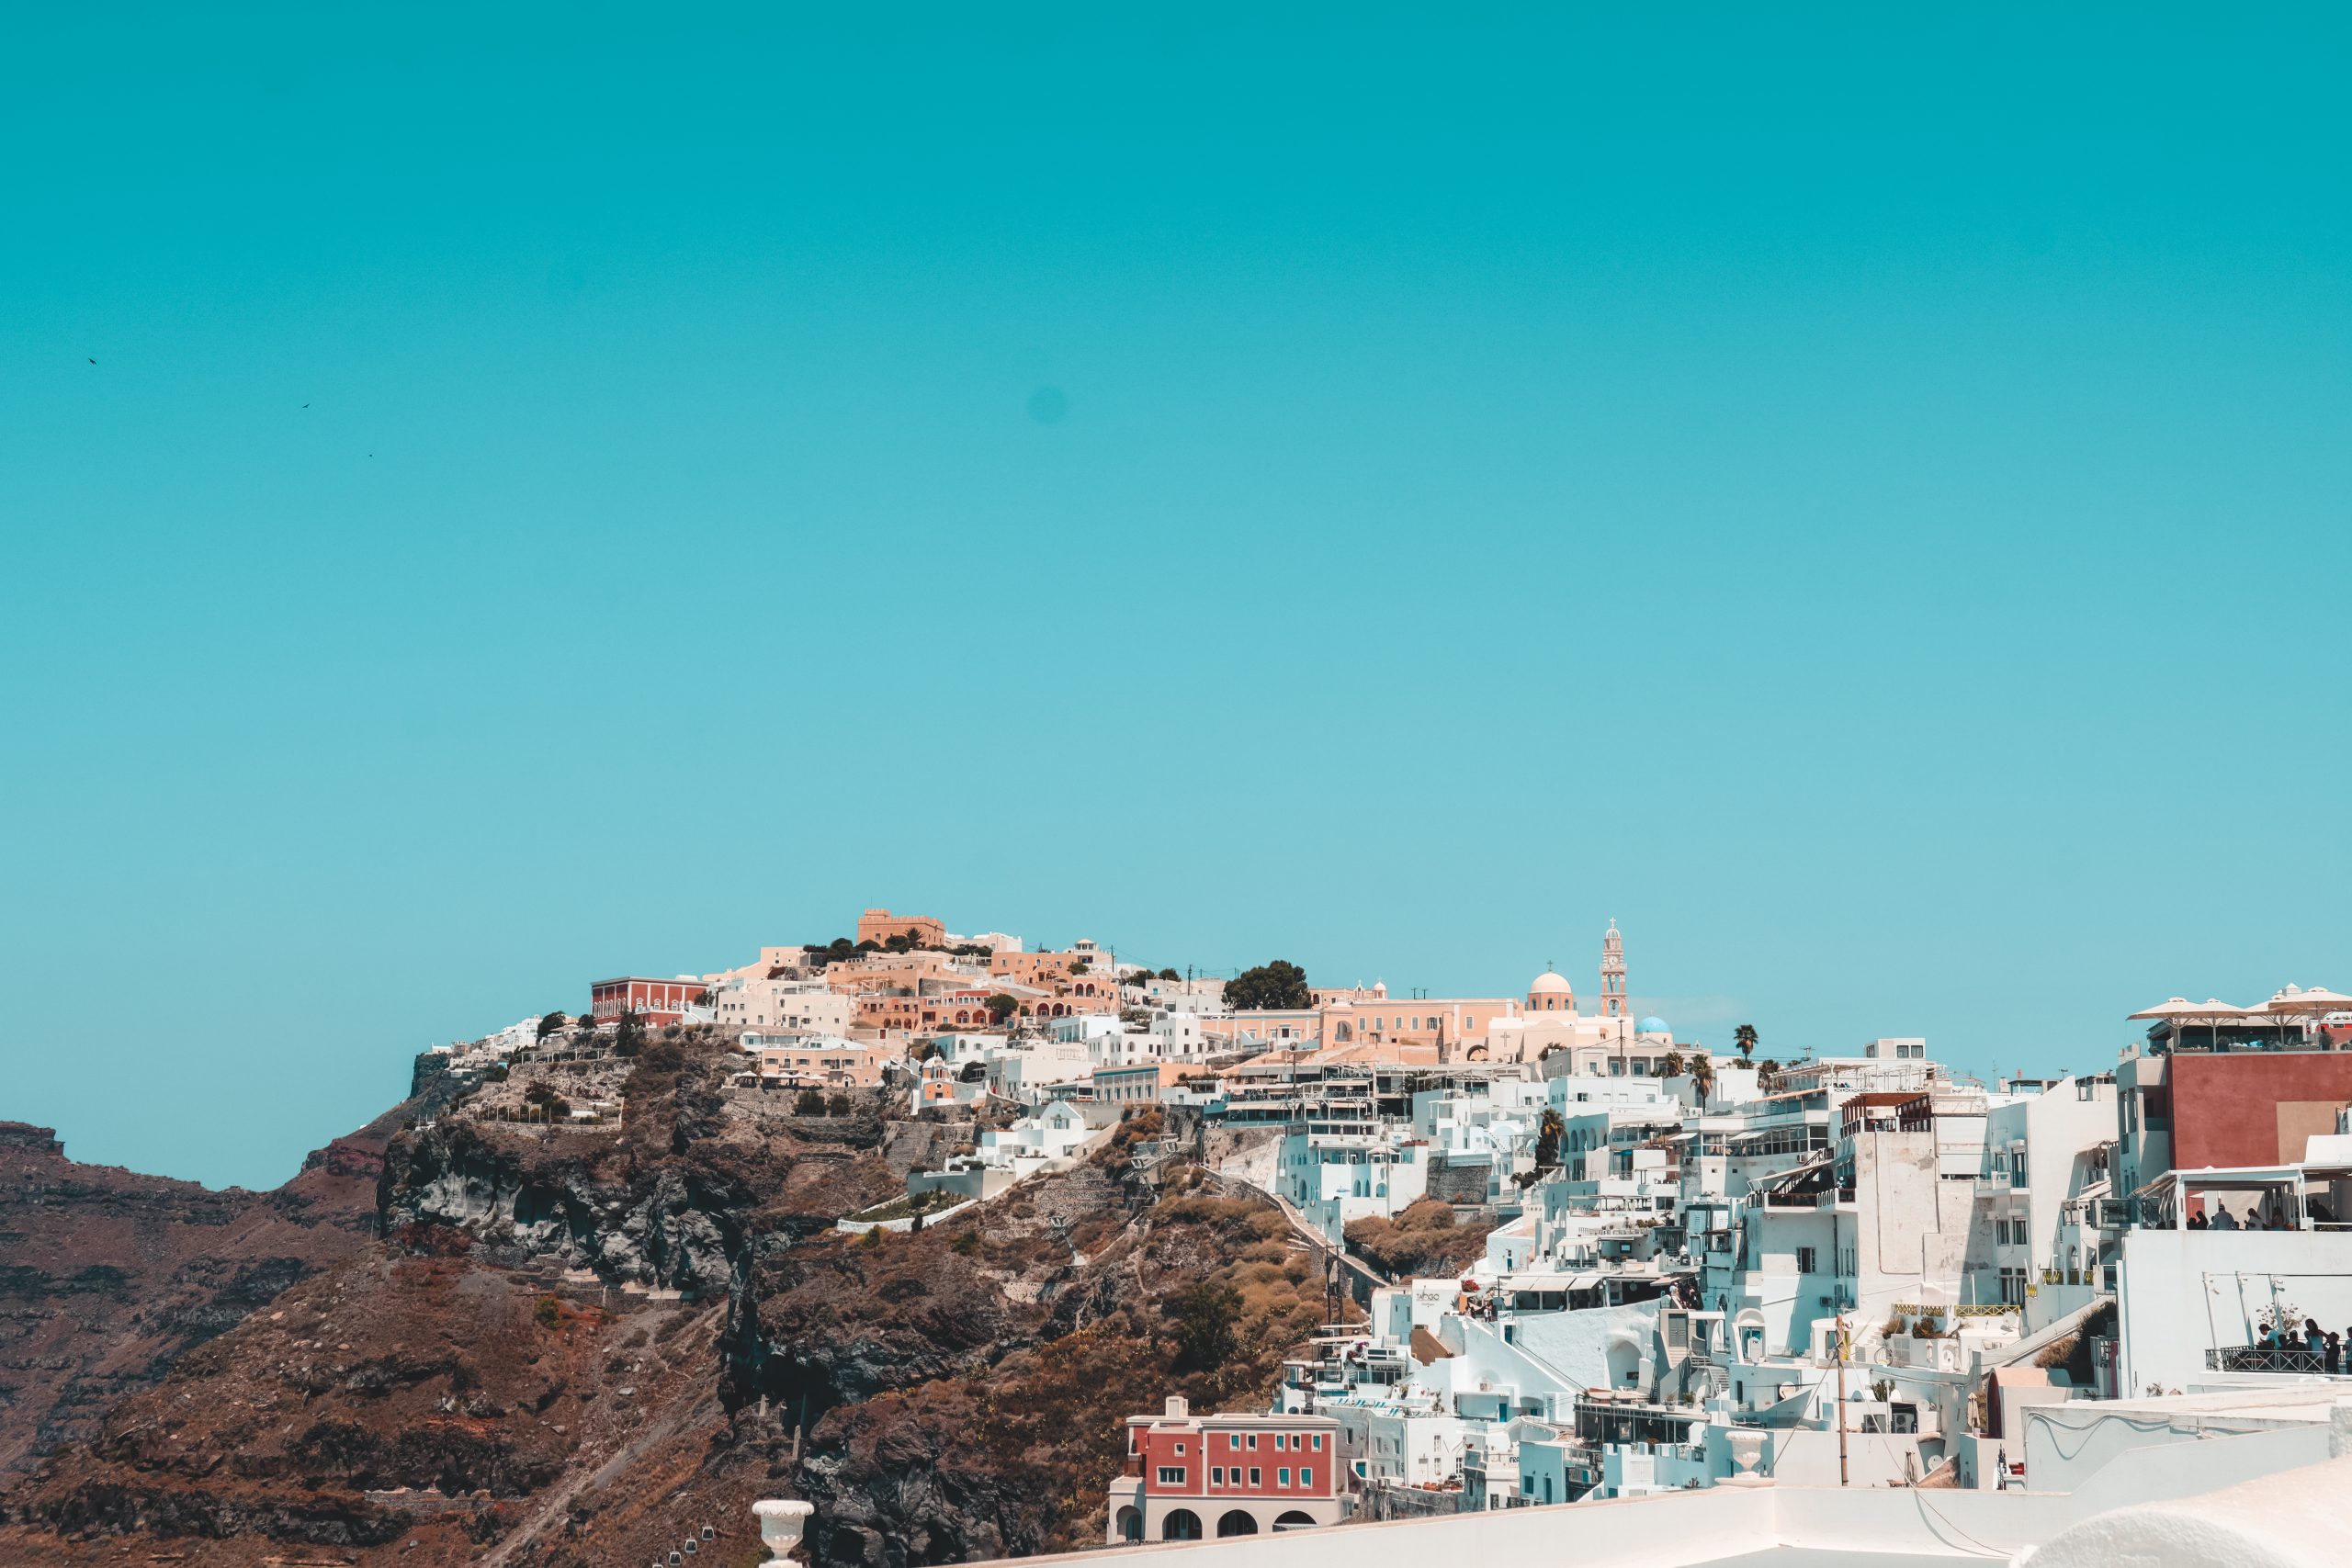 A view of the pastel buildings in Thira